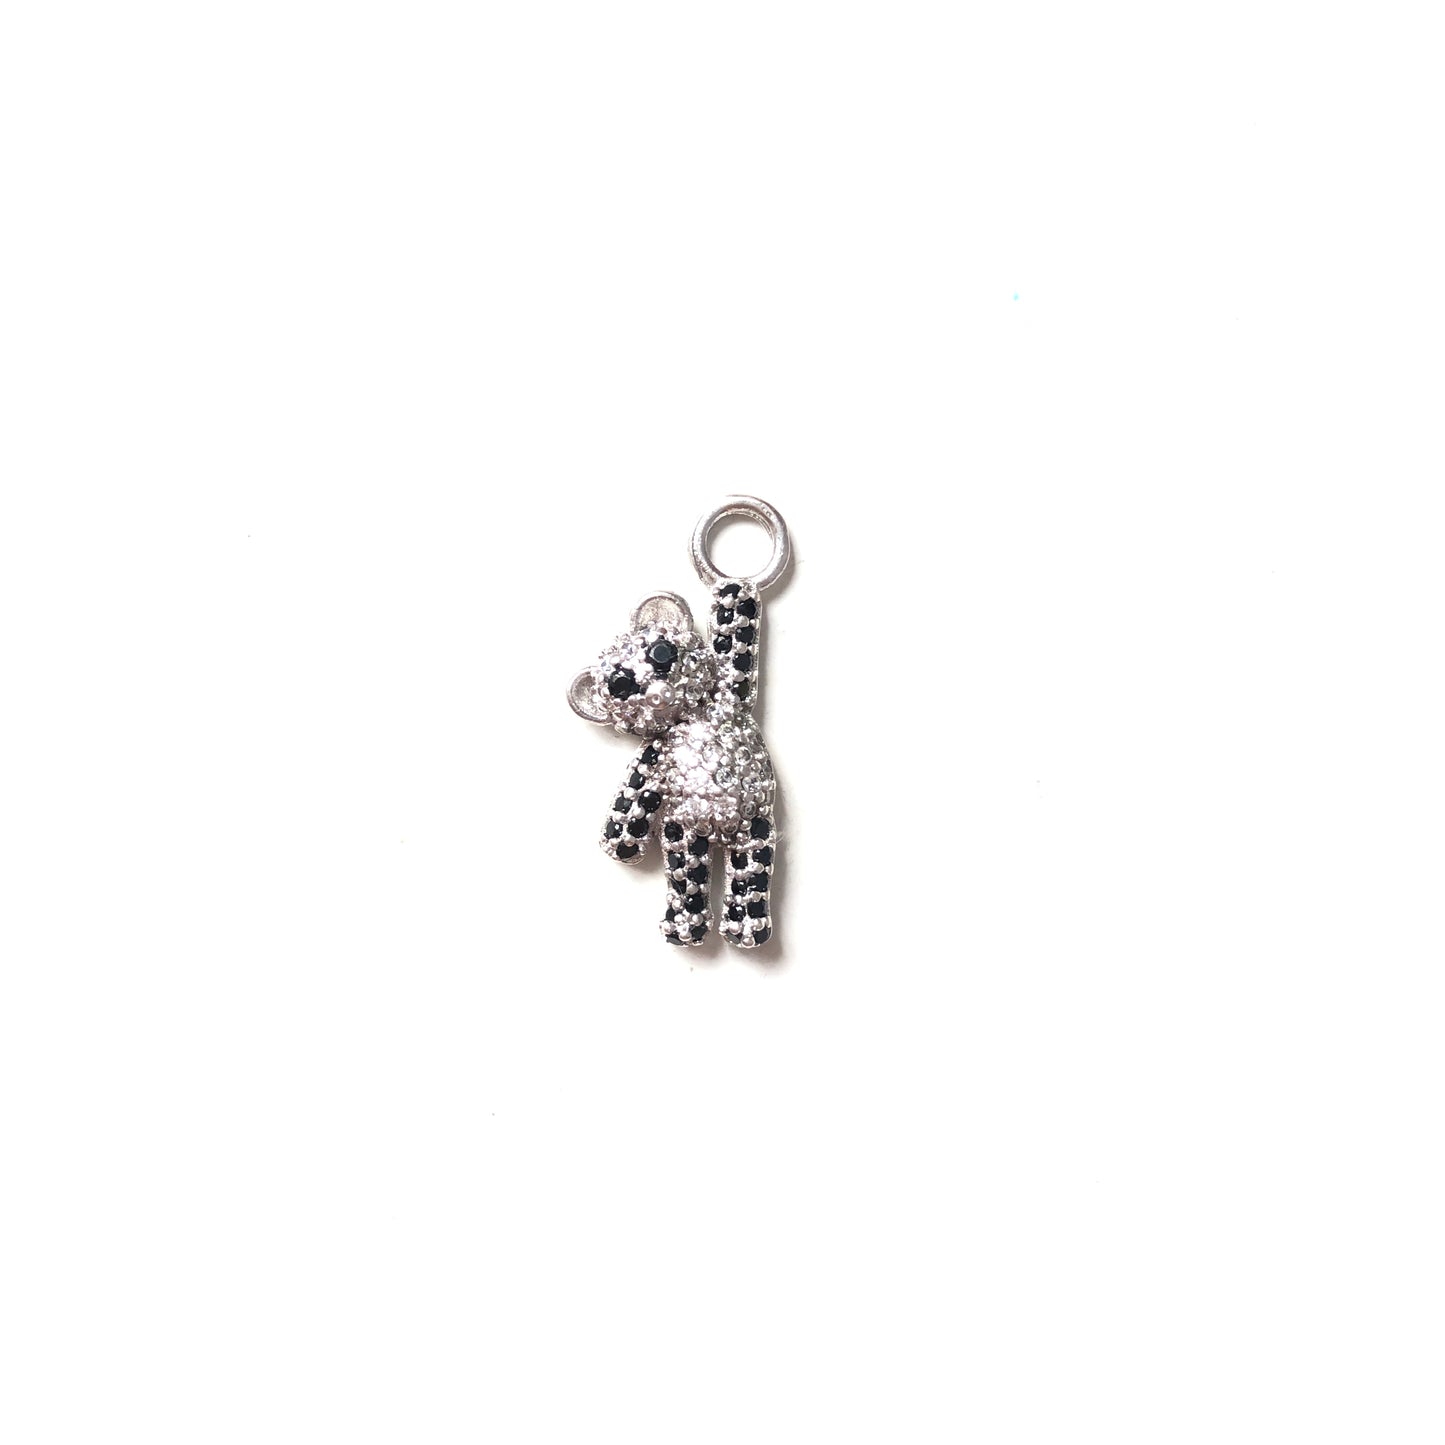 10pcs/lot CZ Paved Cute Baby Bear Charms Small Silver Bear-10pcs CZ Paved Charms Animals & Insects Charms Beads Beyond